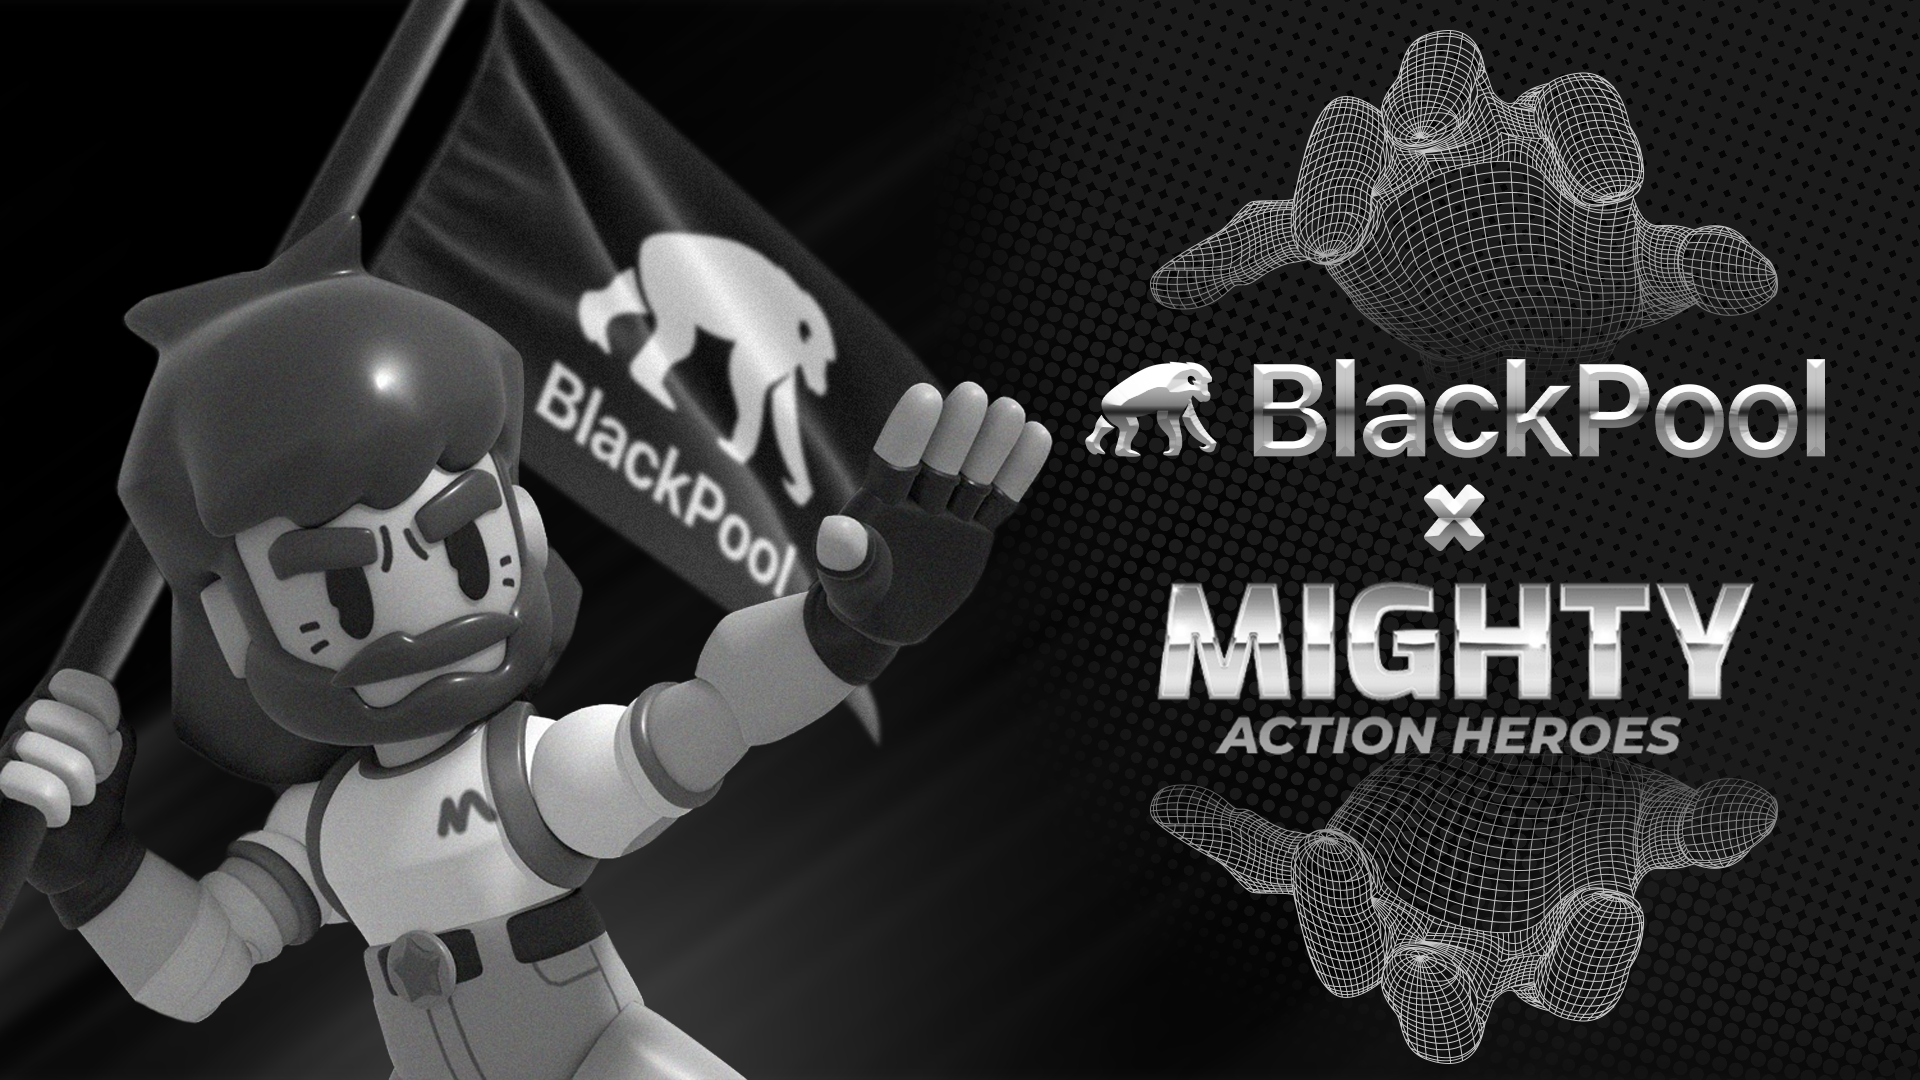 Partnership Announcement: Mighty Action Heroes x BlackPool